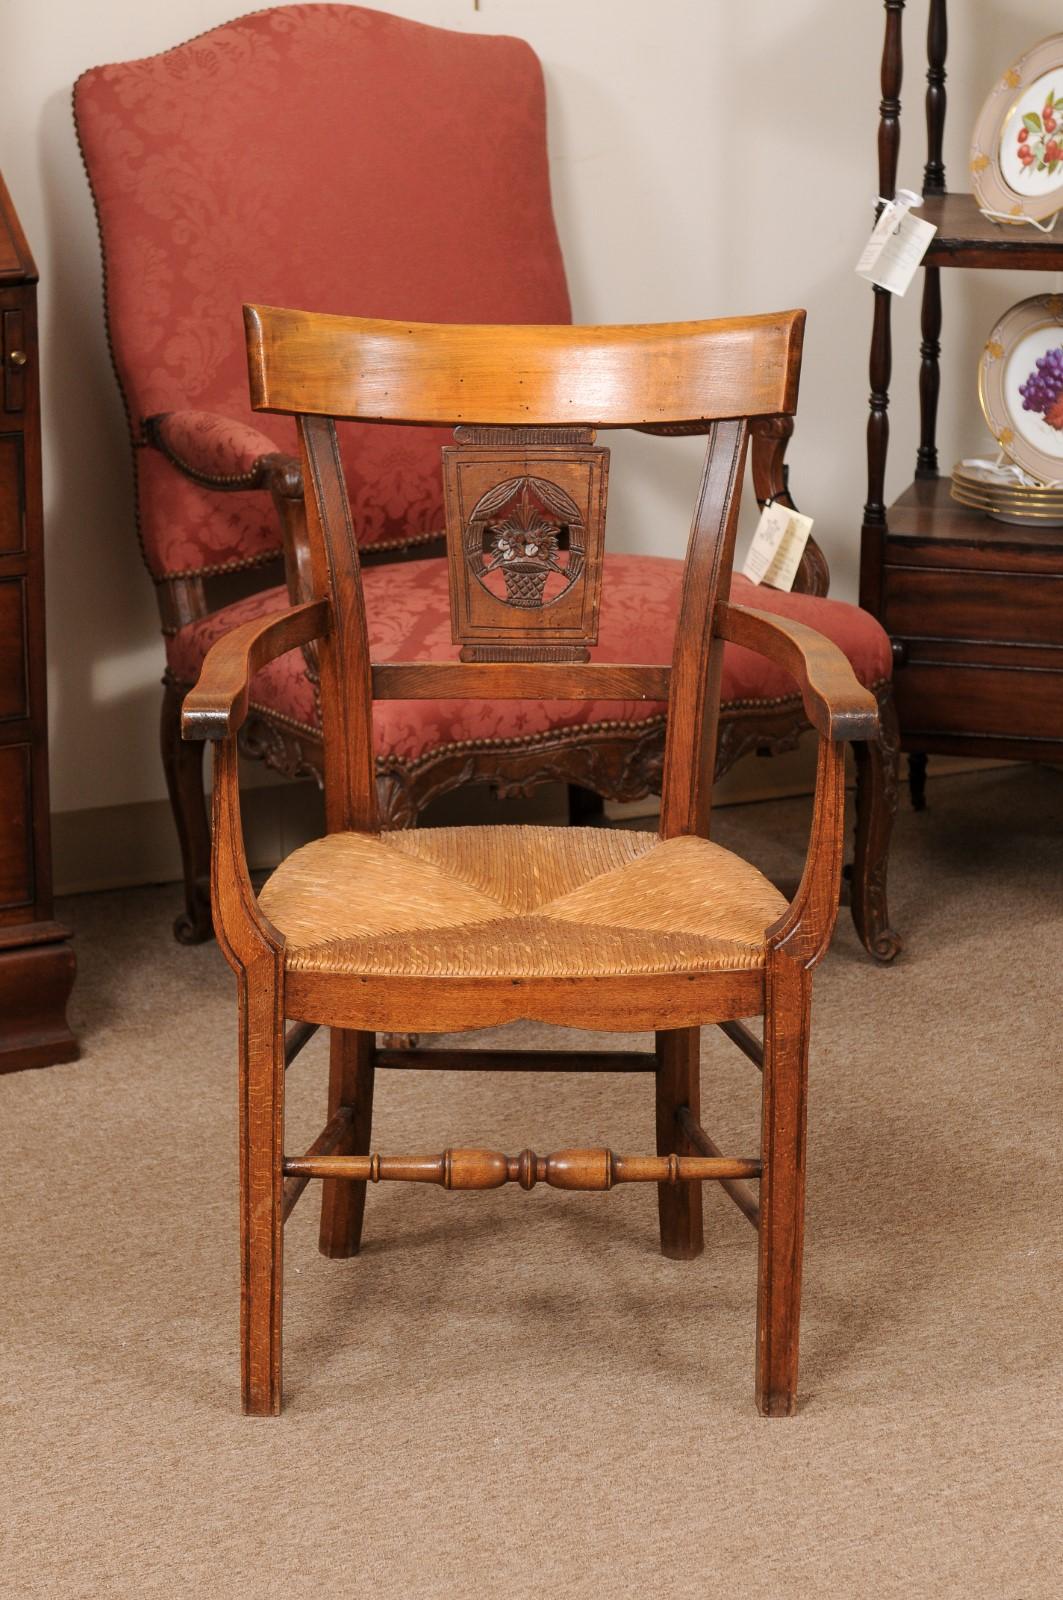 Fruitwood Rush Seat Armchair with Flower Basket Backsplat, Italy ca. 1850 For Sale 2